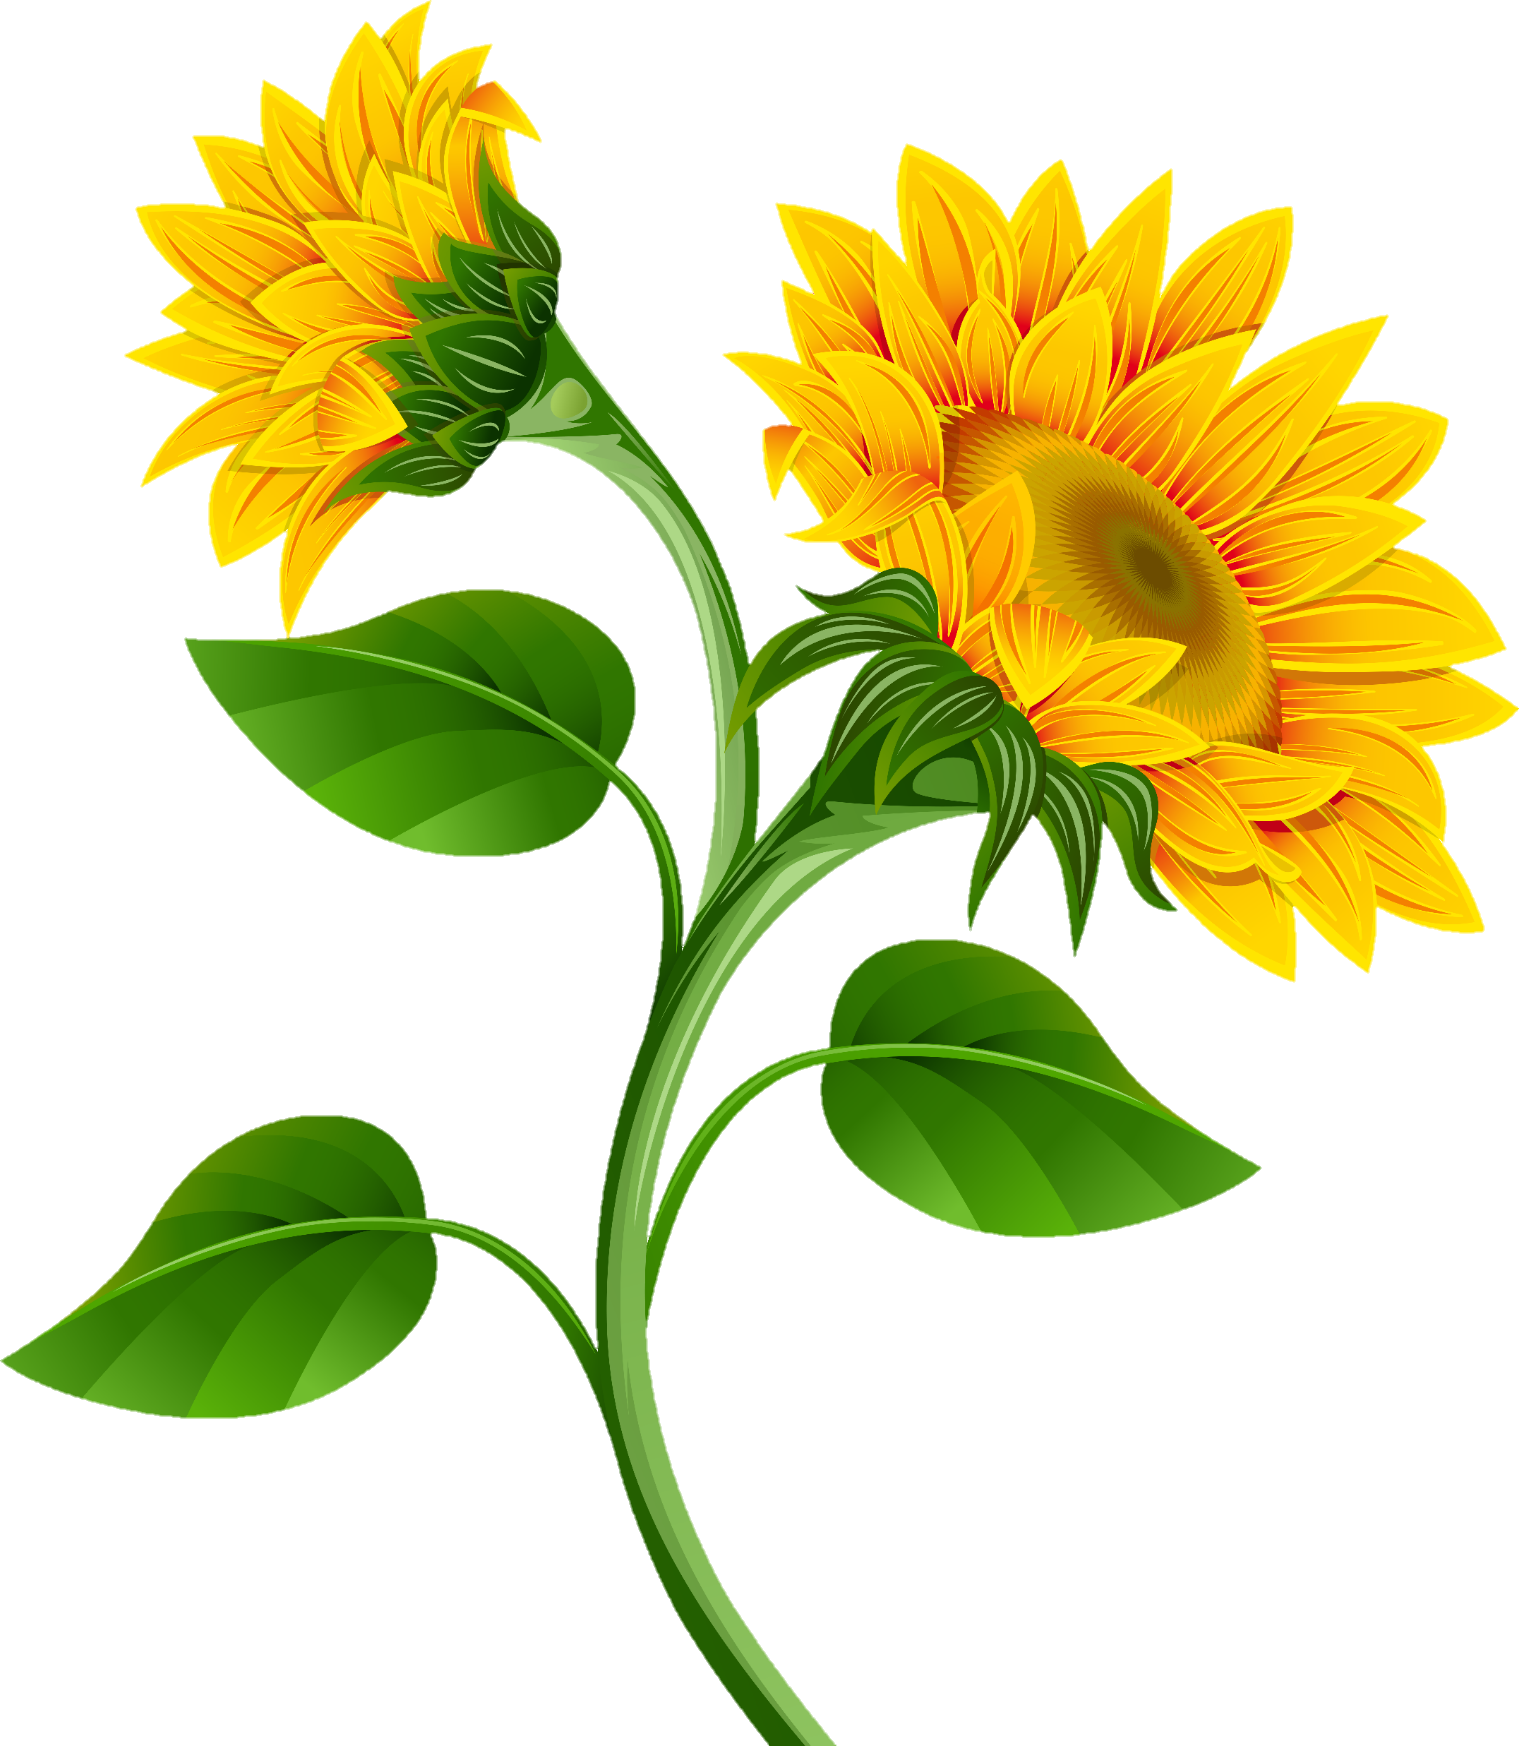 sunflower-png-image-from-pngfre-11